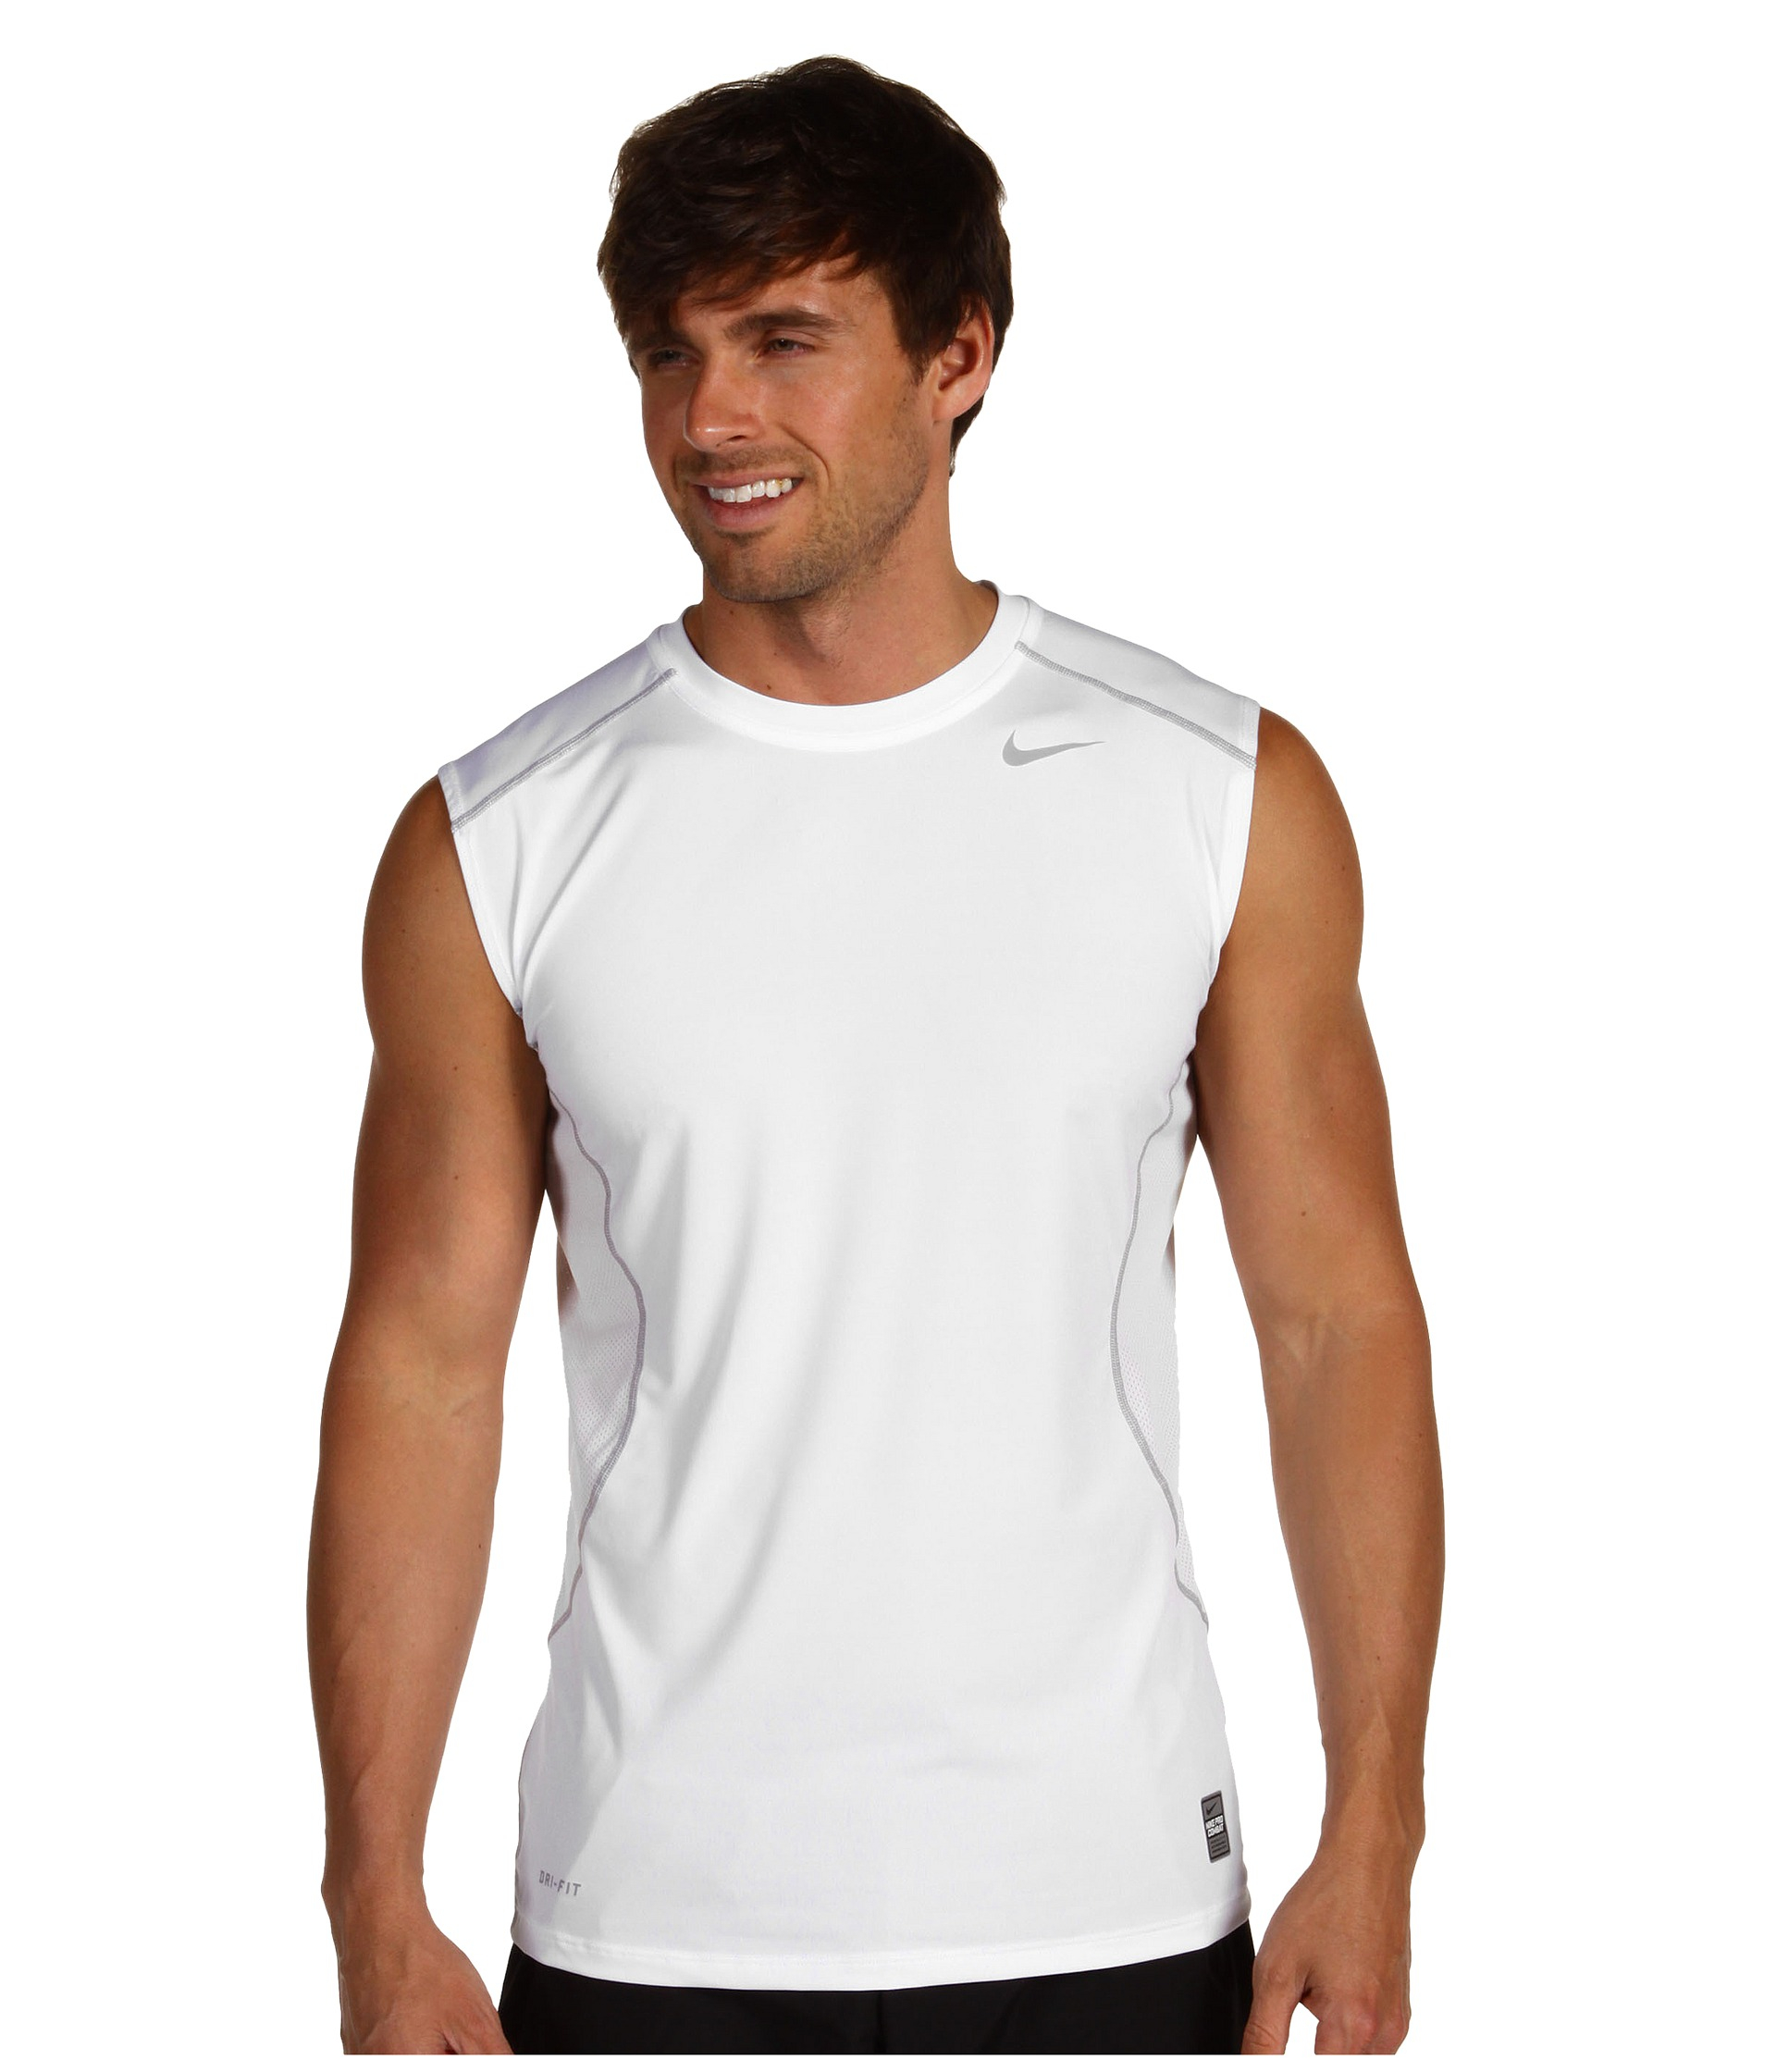 Nike Pro Combat Core Fitted S/L Shirt in White/Metallic Silver (Metallic)  for Men - Lyst